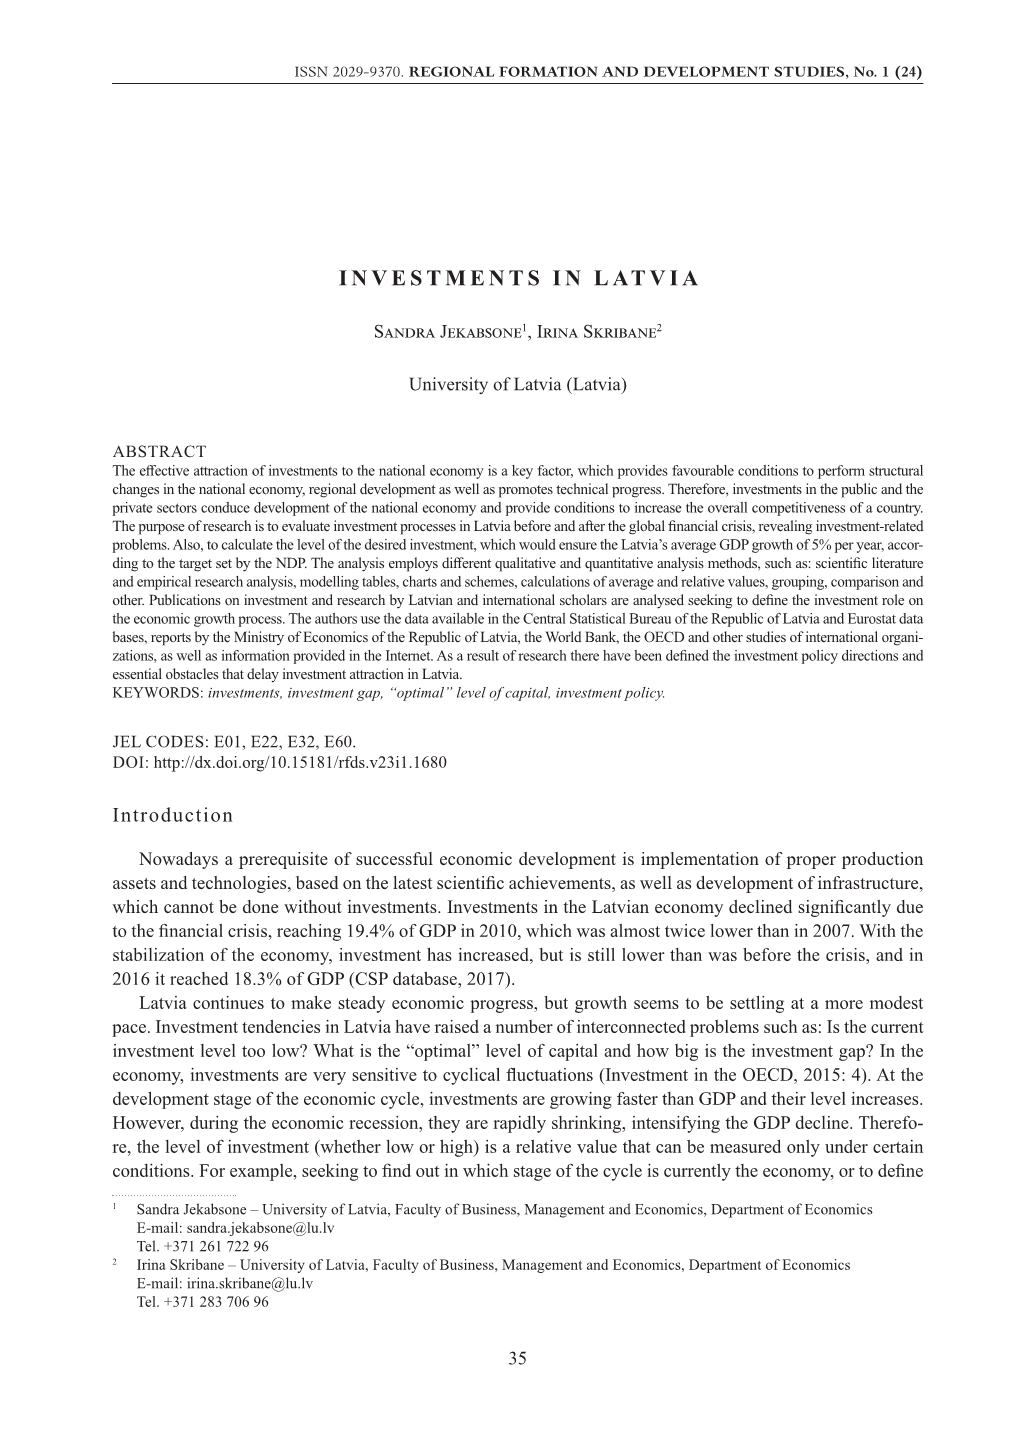 Investments in Latvia